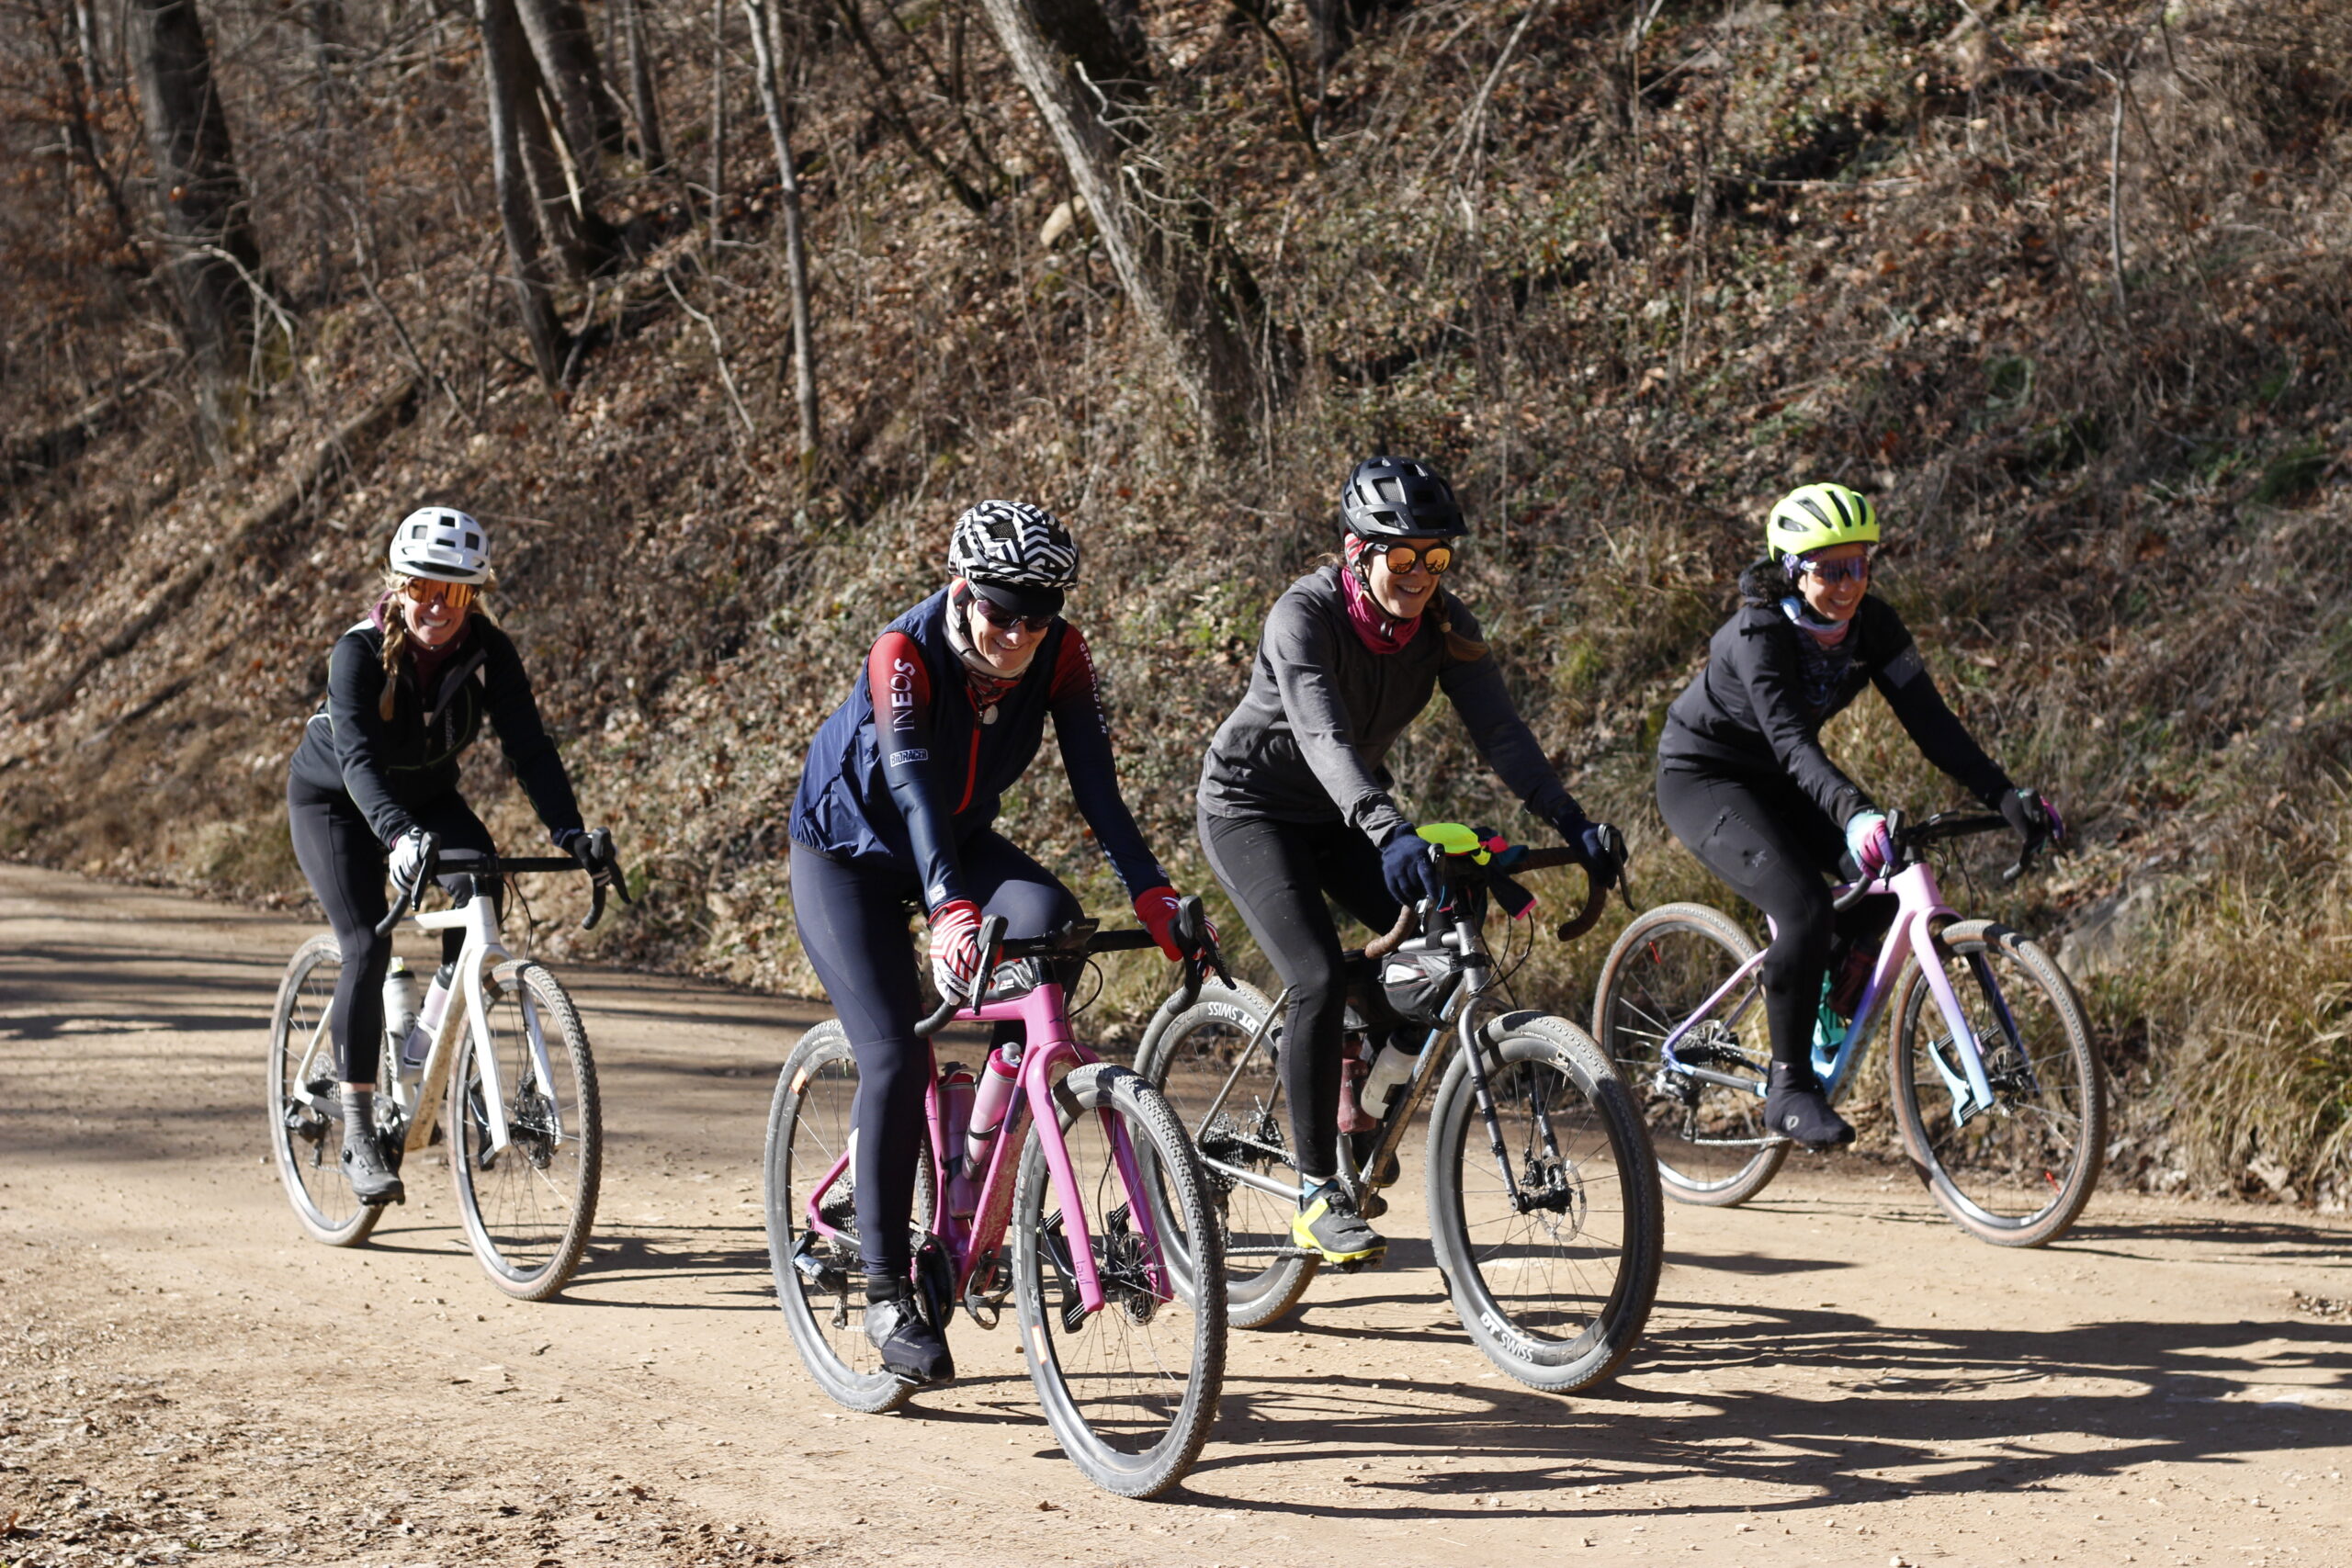 A group of four ladies smile as they ride past on their gravel bikes.